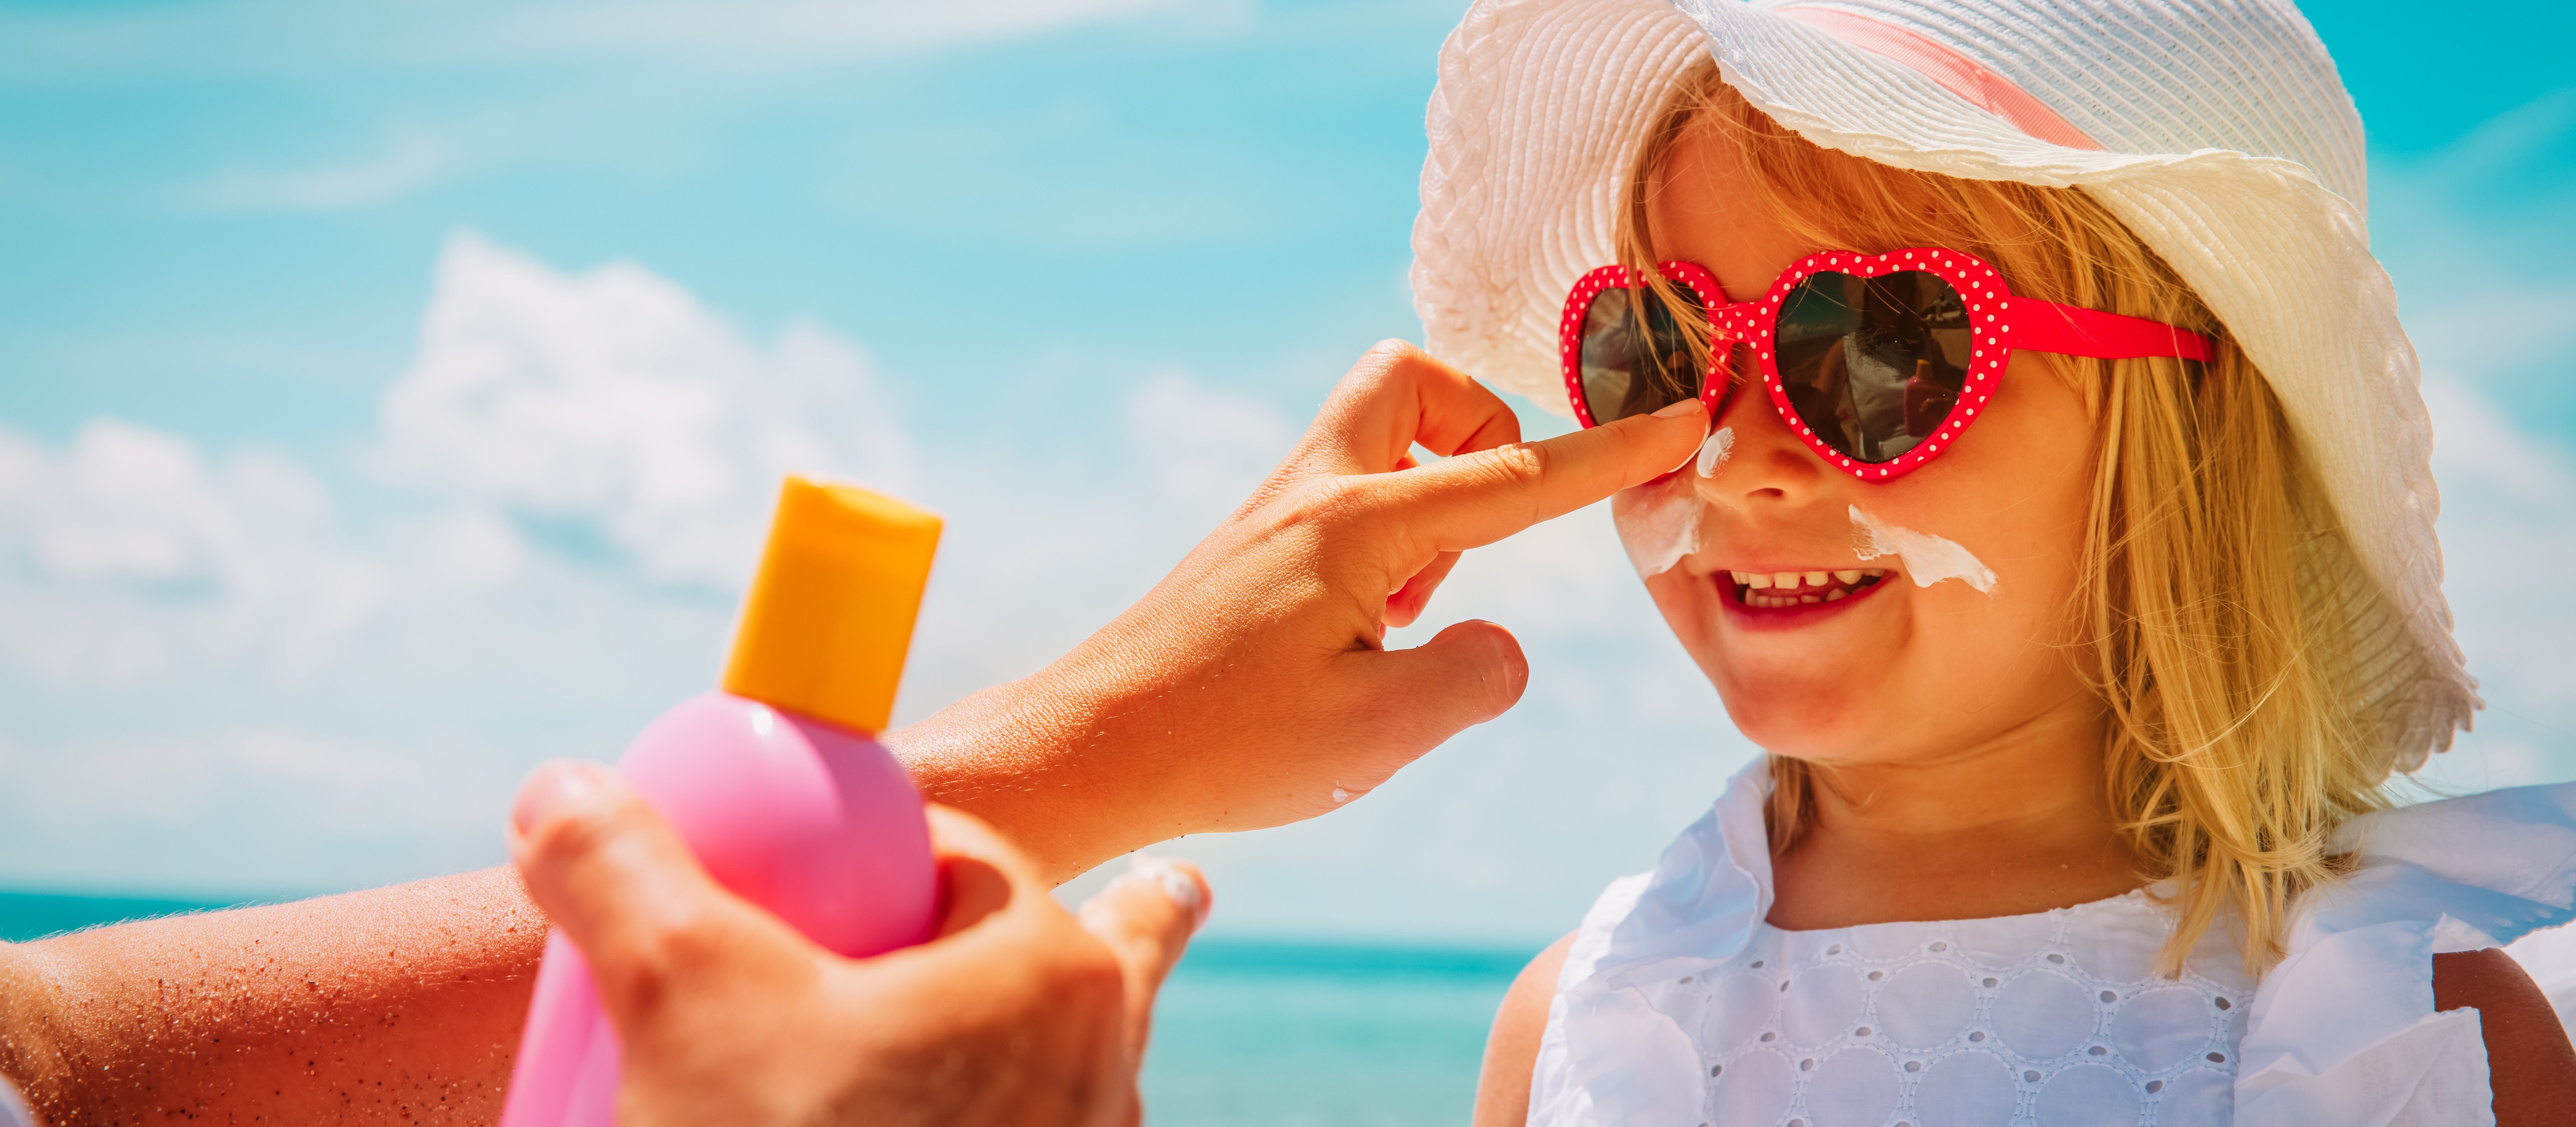 Blonde girl wearing white dress and sunhat, pink sunglasses, getting sunscreen applied to her face